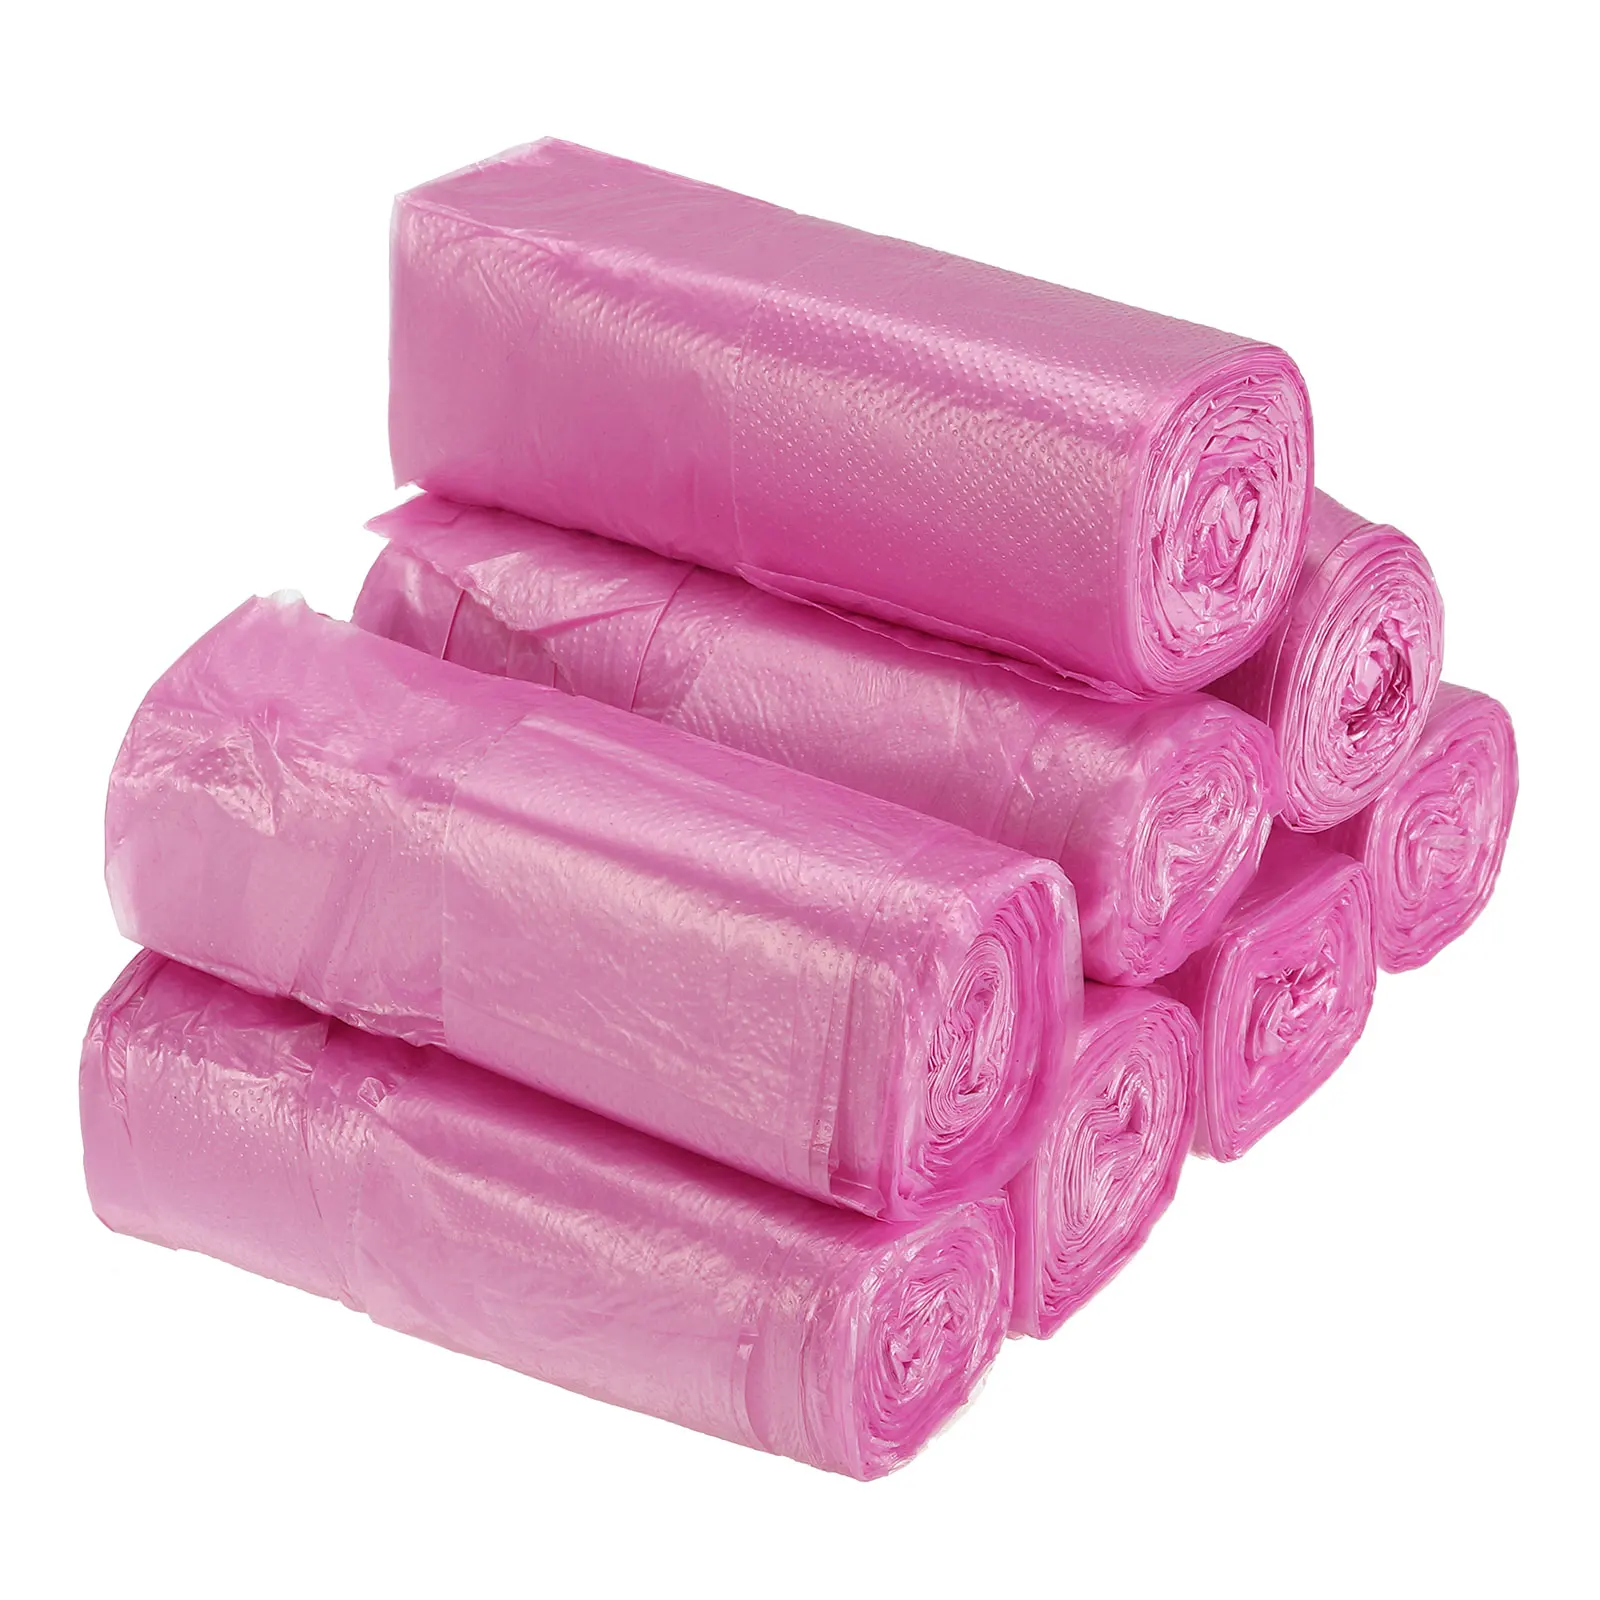 8/16 Rolls Small Trash Bags Pink 2-4 Gallon Thicken Disposable